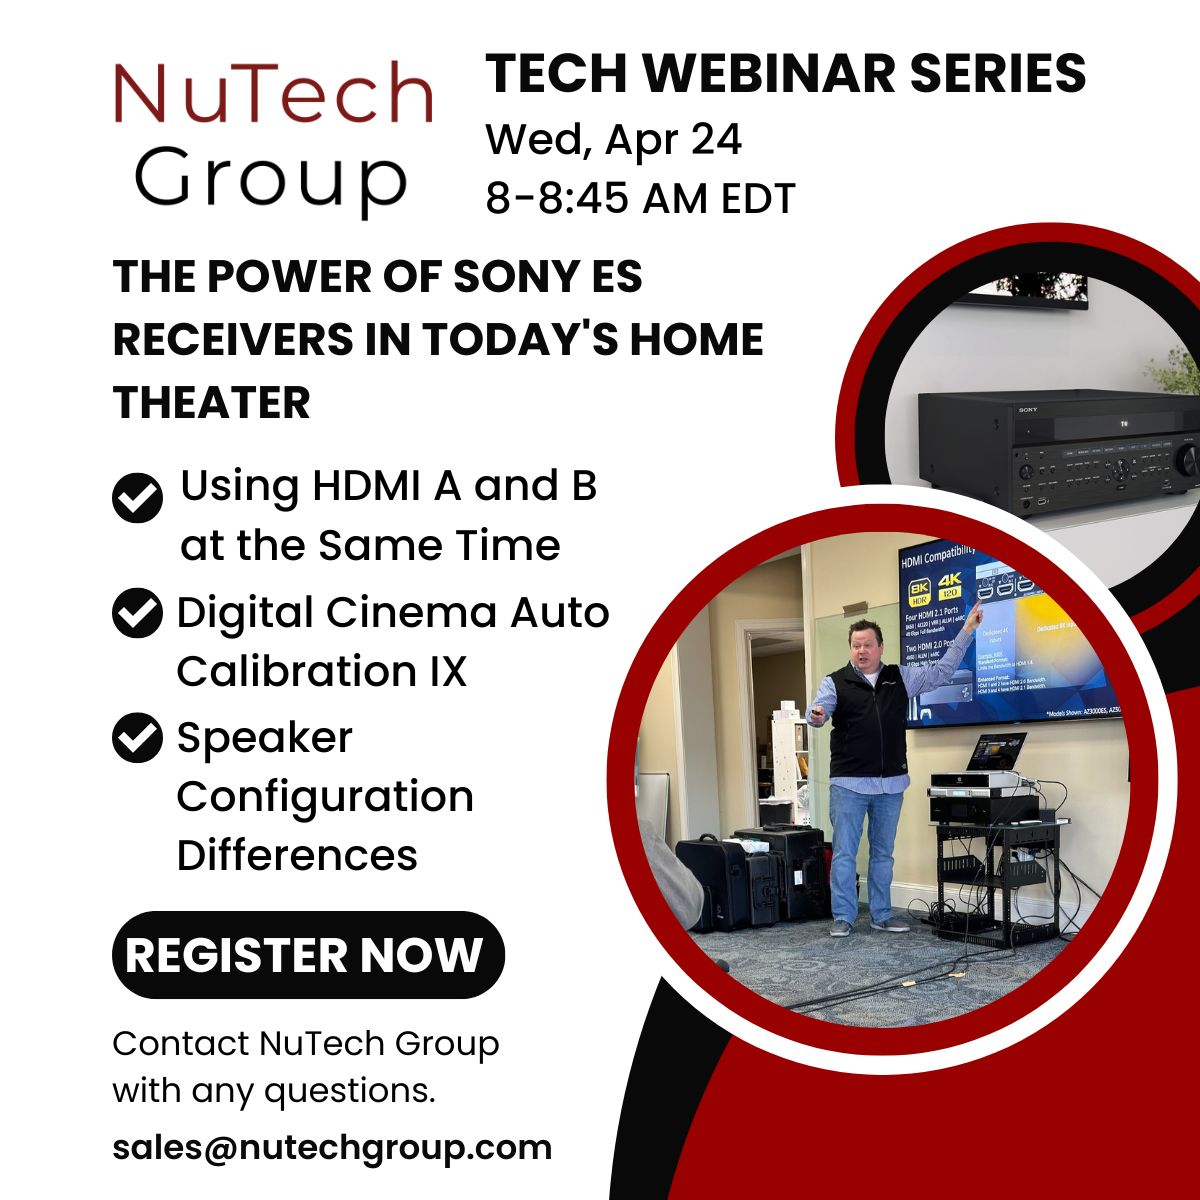 Don't miss Jason Bohrman hosting a new monthly webinar series for NuTech Group dealers’ techs and installers. Date: Wed., April 24th | 8 am to 8:45 am EDT
Session: The Power of Sony ES Receivers in Today's Home Theater  
Contact your NuTech Group rep to register.